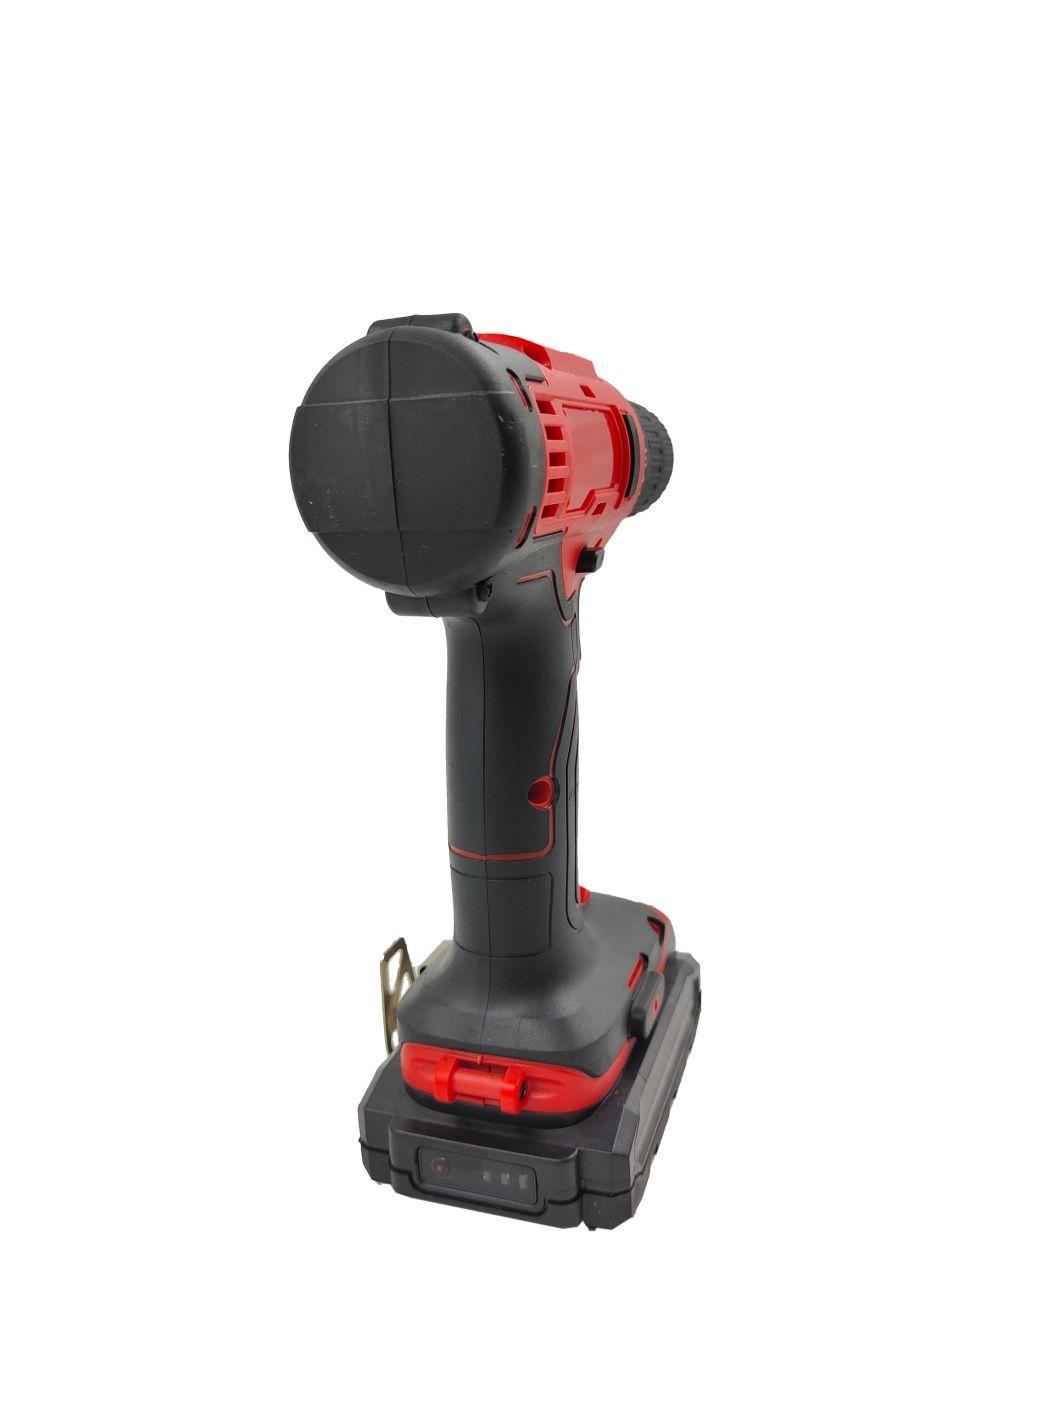 Hot Sale 1500mAh Cordless Drill with Quick Charger Power Tool